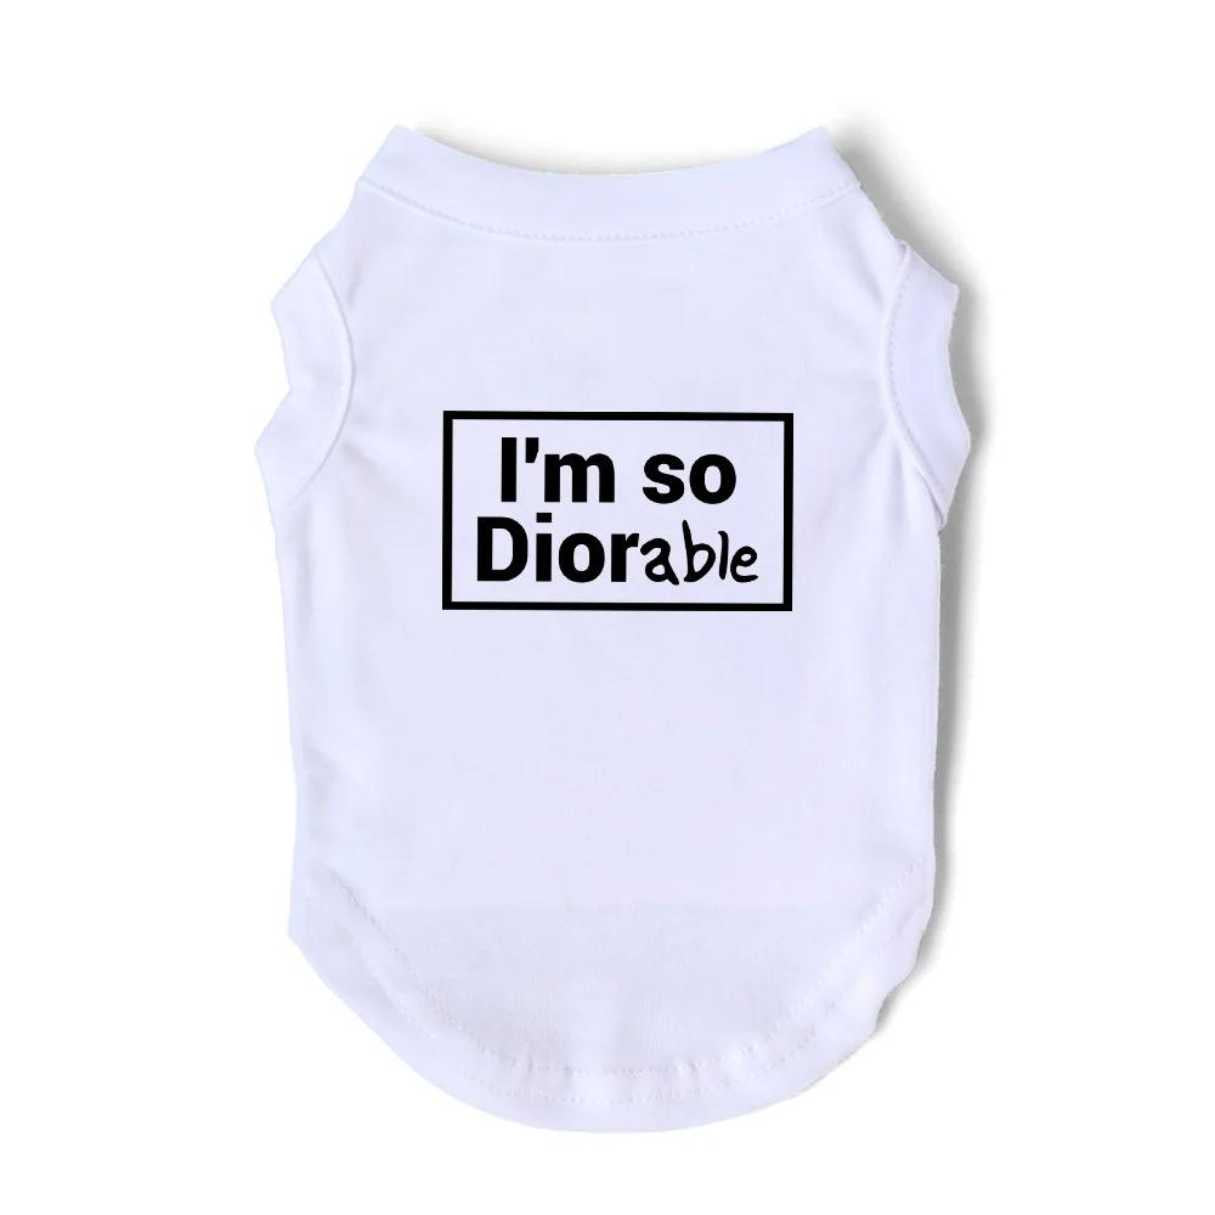 Diorable White Dog Tshirt, singlet, sleeveless tops with black text.